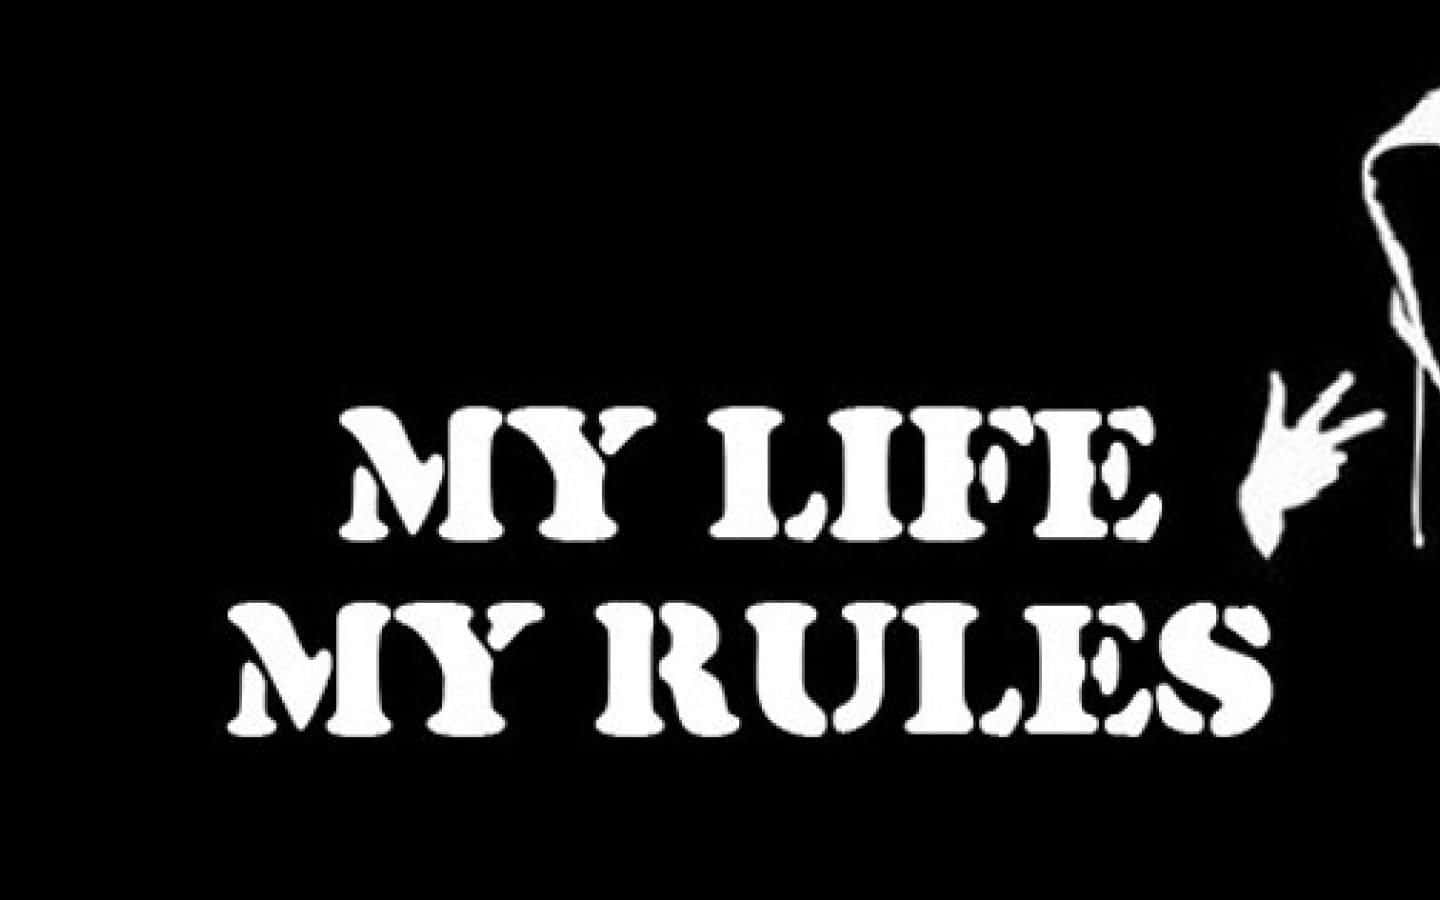 Me life my rules. My Life my Rules обои. Картина my Life my Rules. My Life my Rules на машине. My Life my Rules шрифт.